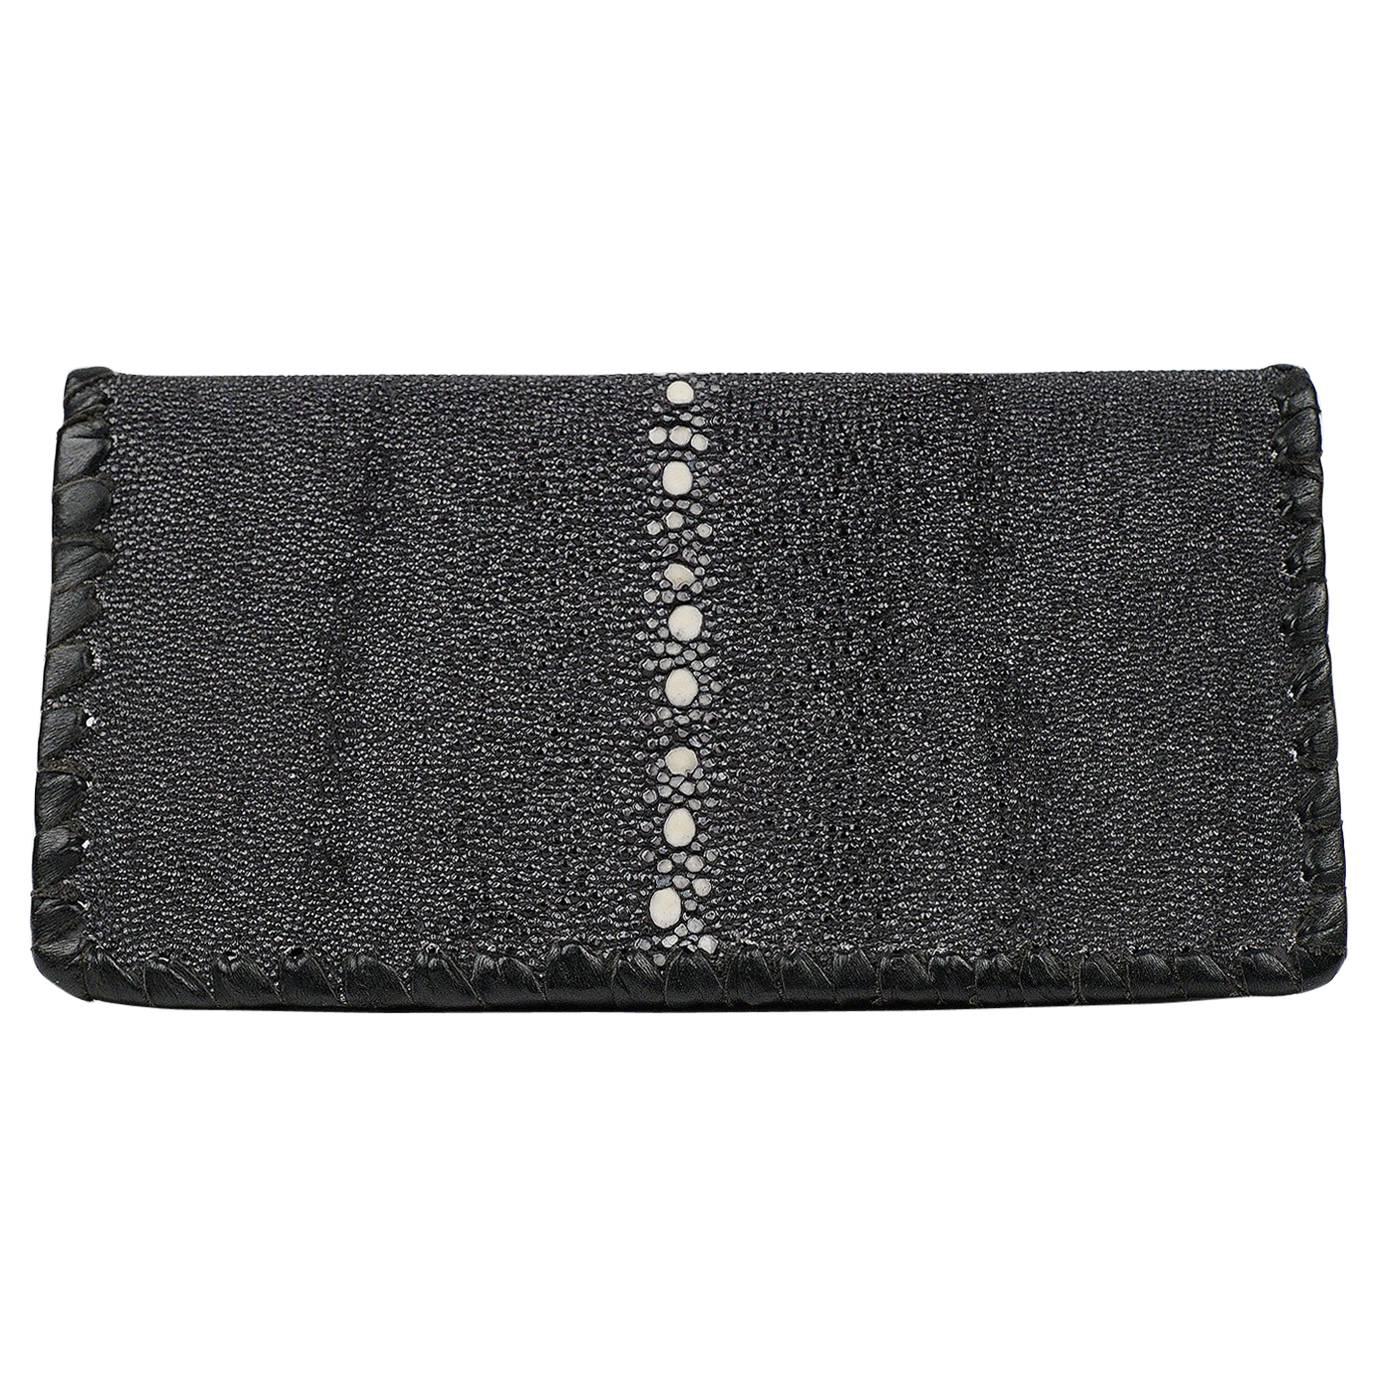 Hand Crafted Black Stingray Leather Artisan Wallet